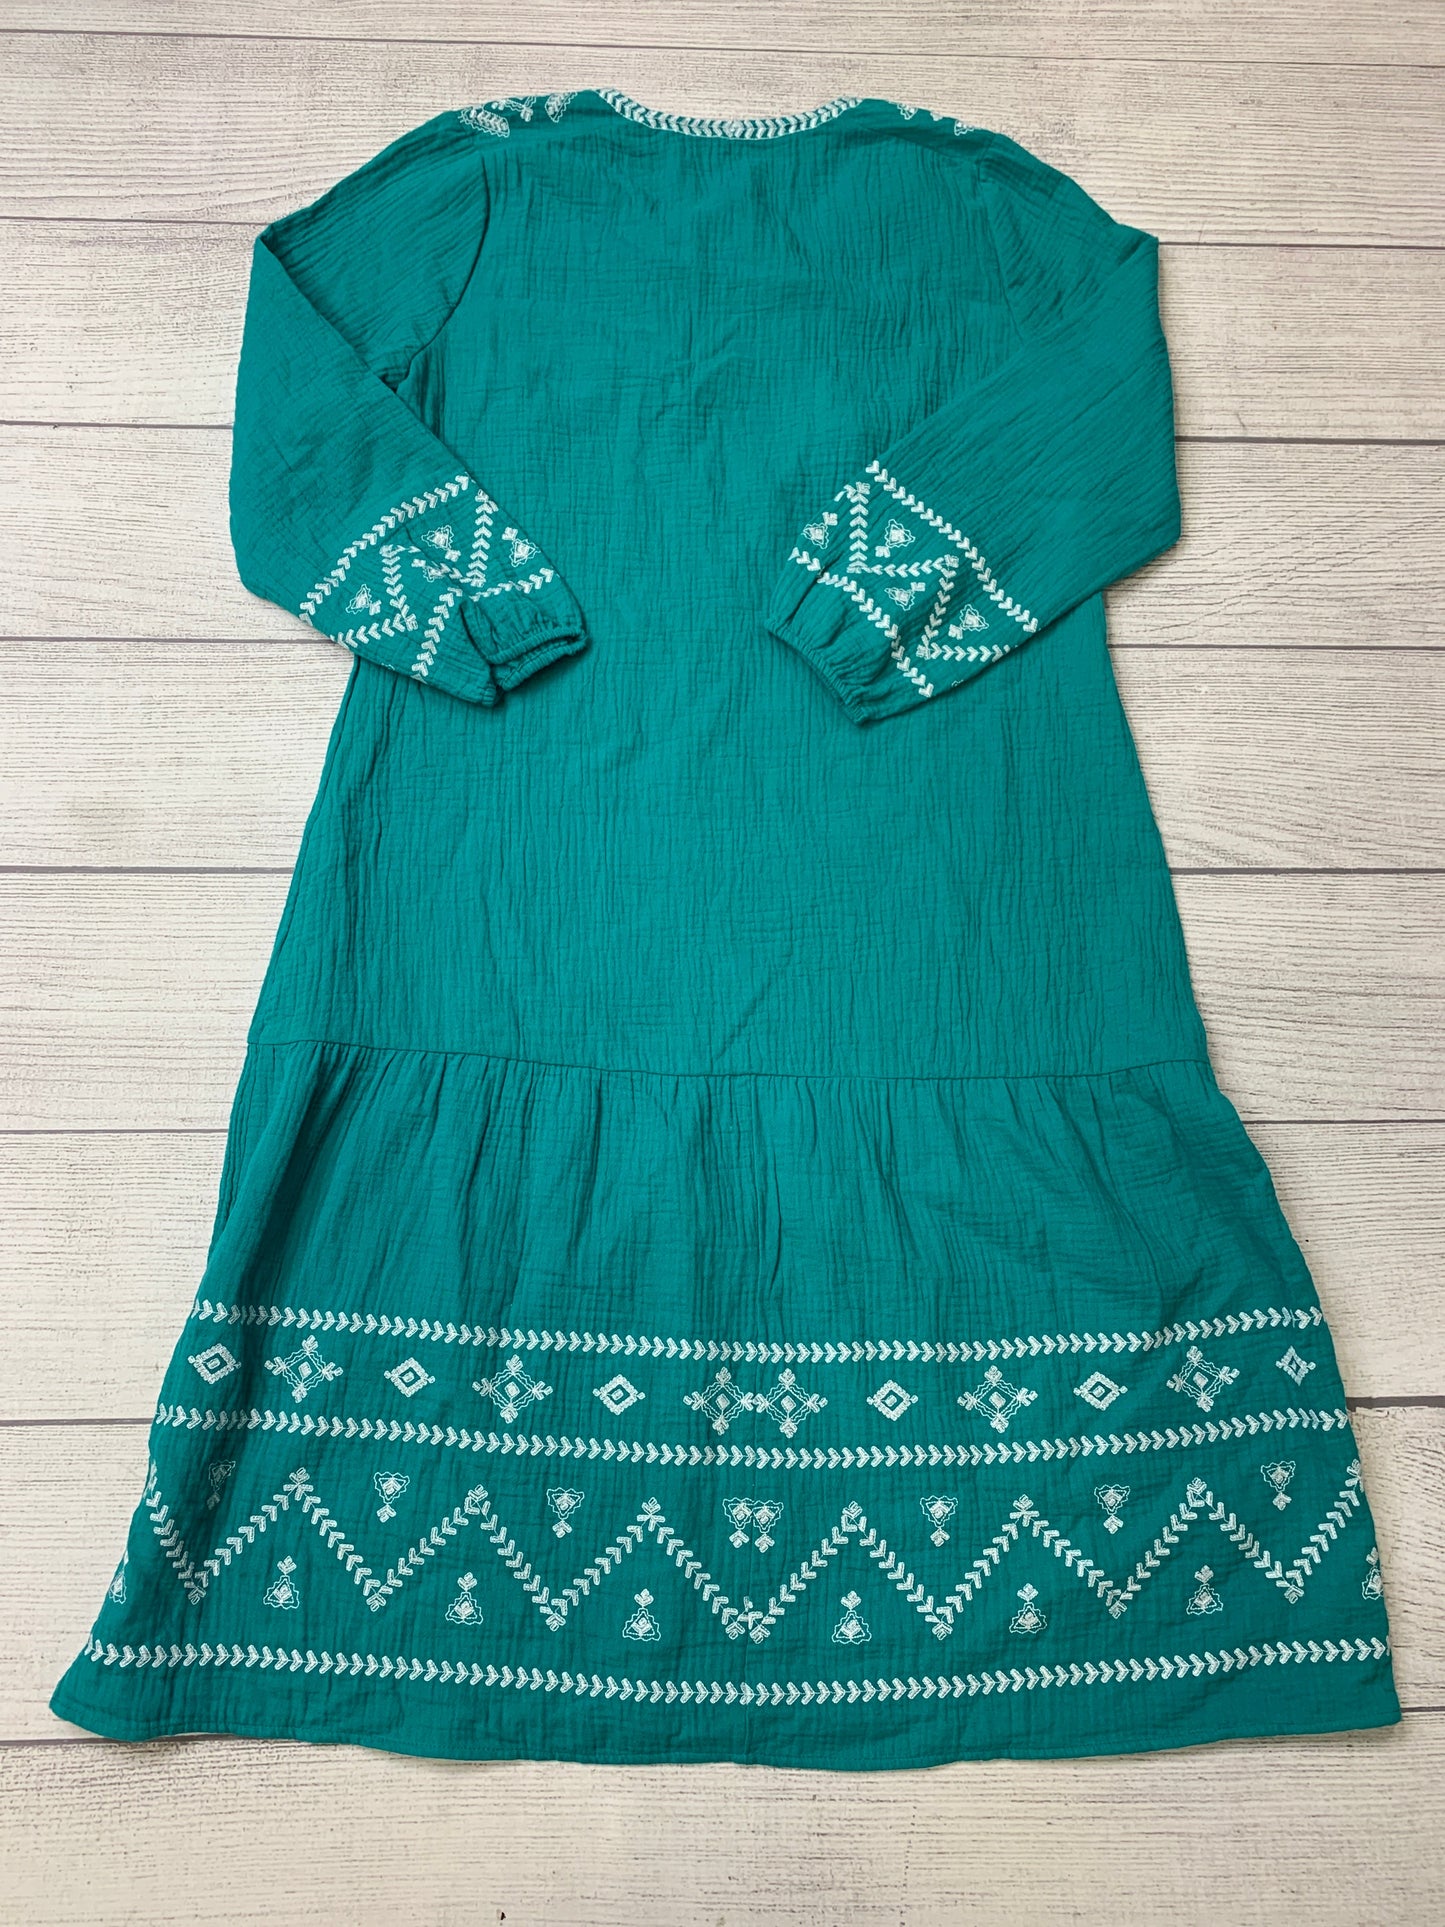 New! Turquoise Dress by Soft Surroundings, Size L